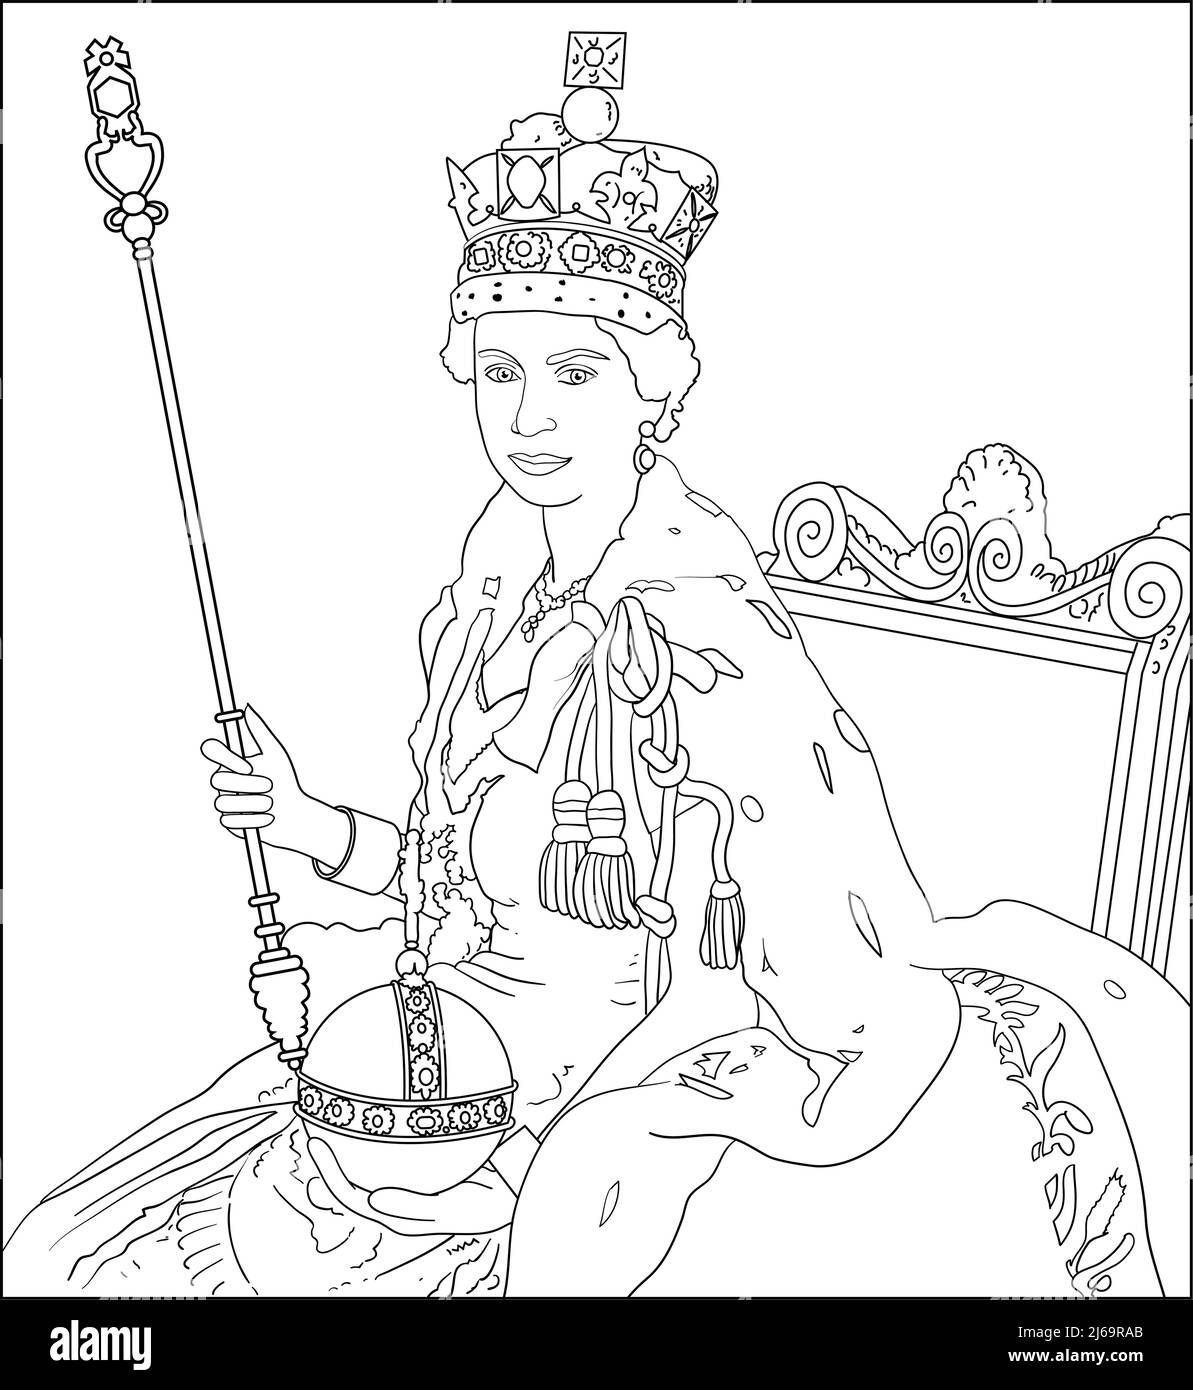 Black and white line drawing suitable for colouring in, educational worksheets, children's play Platinum Jubilee photocopiable Queen Elizabeth II art Stock Photo